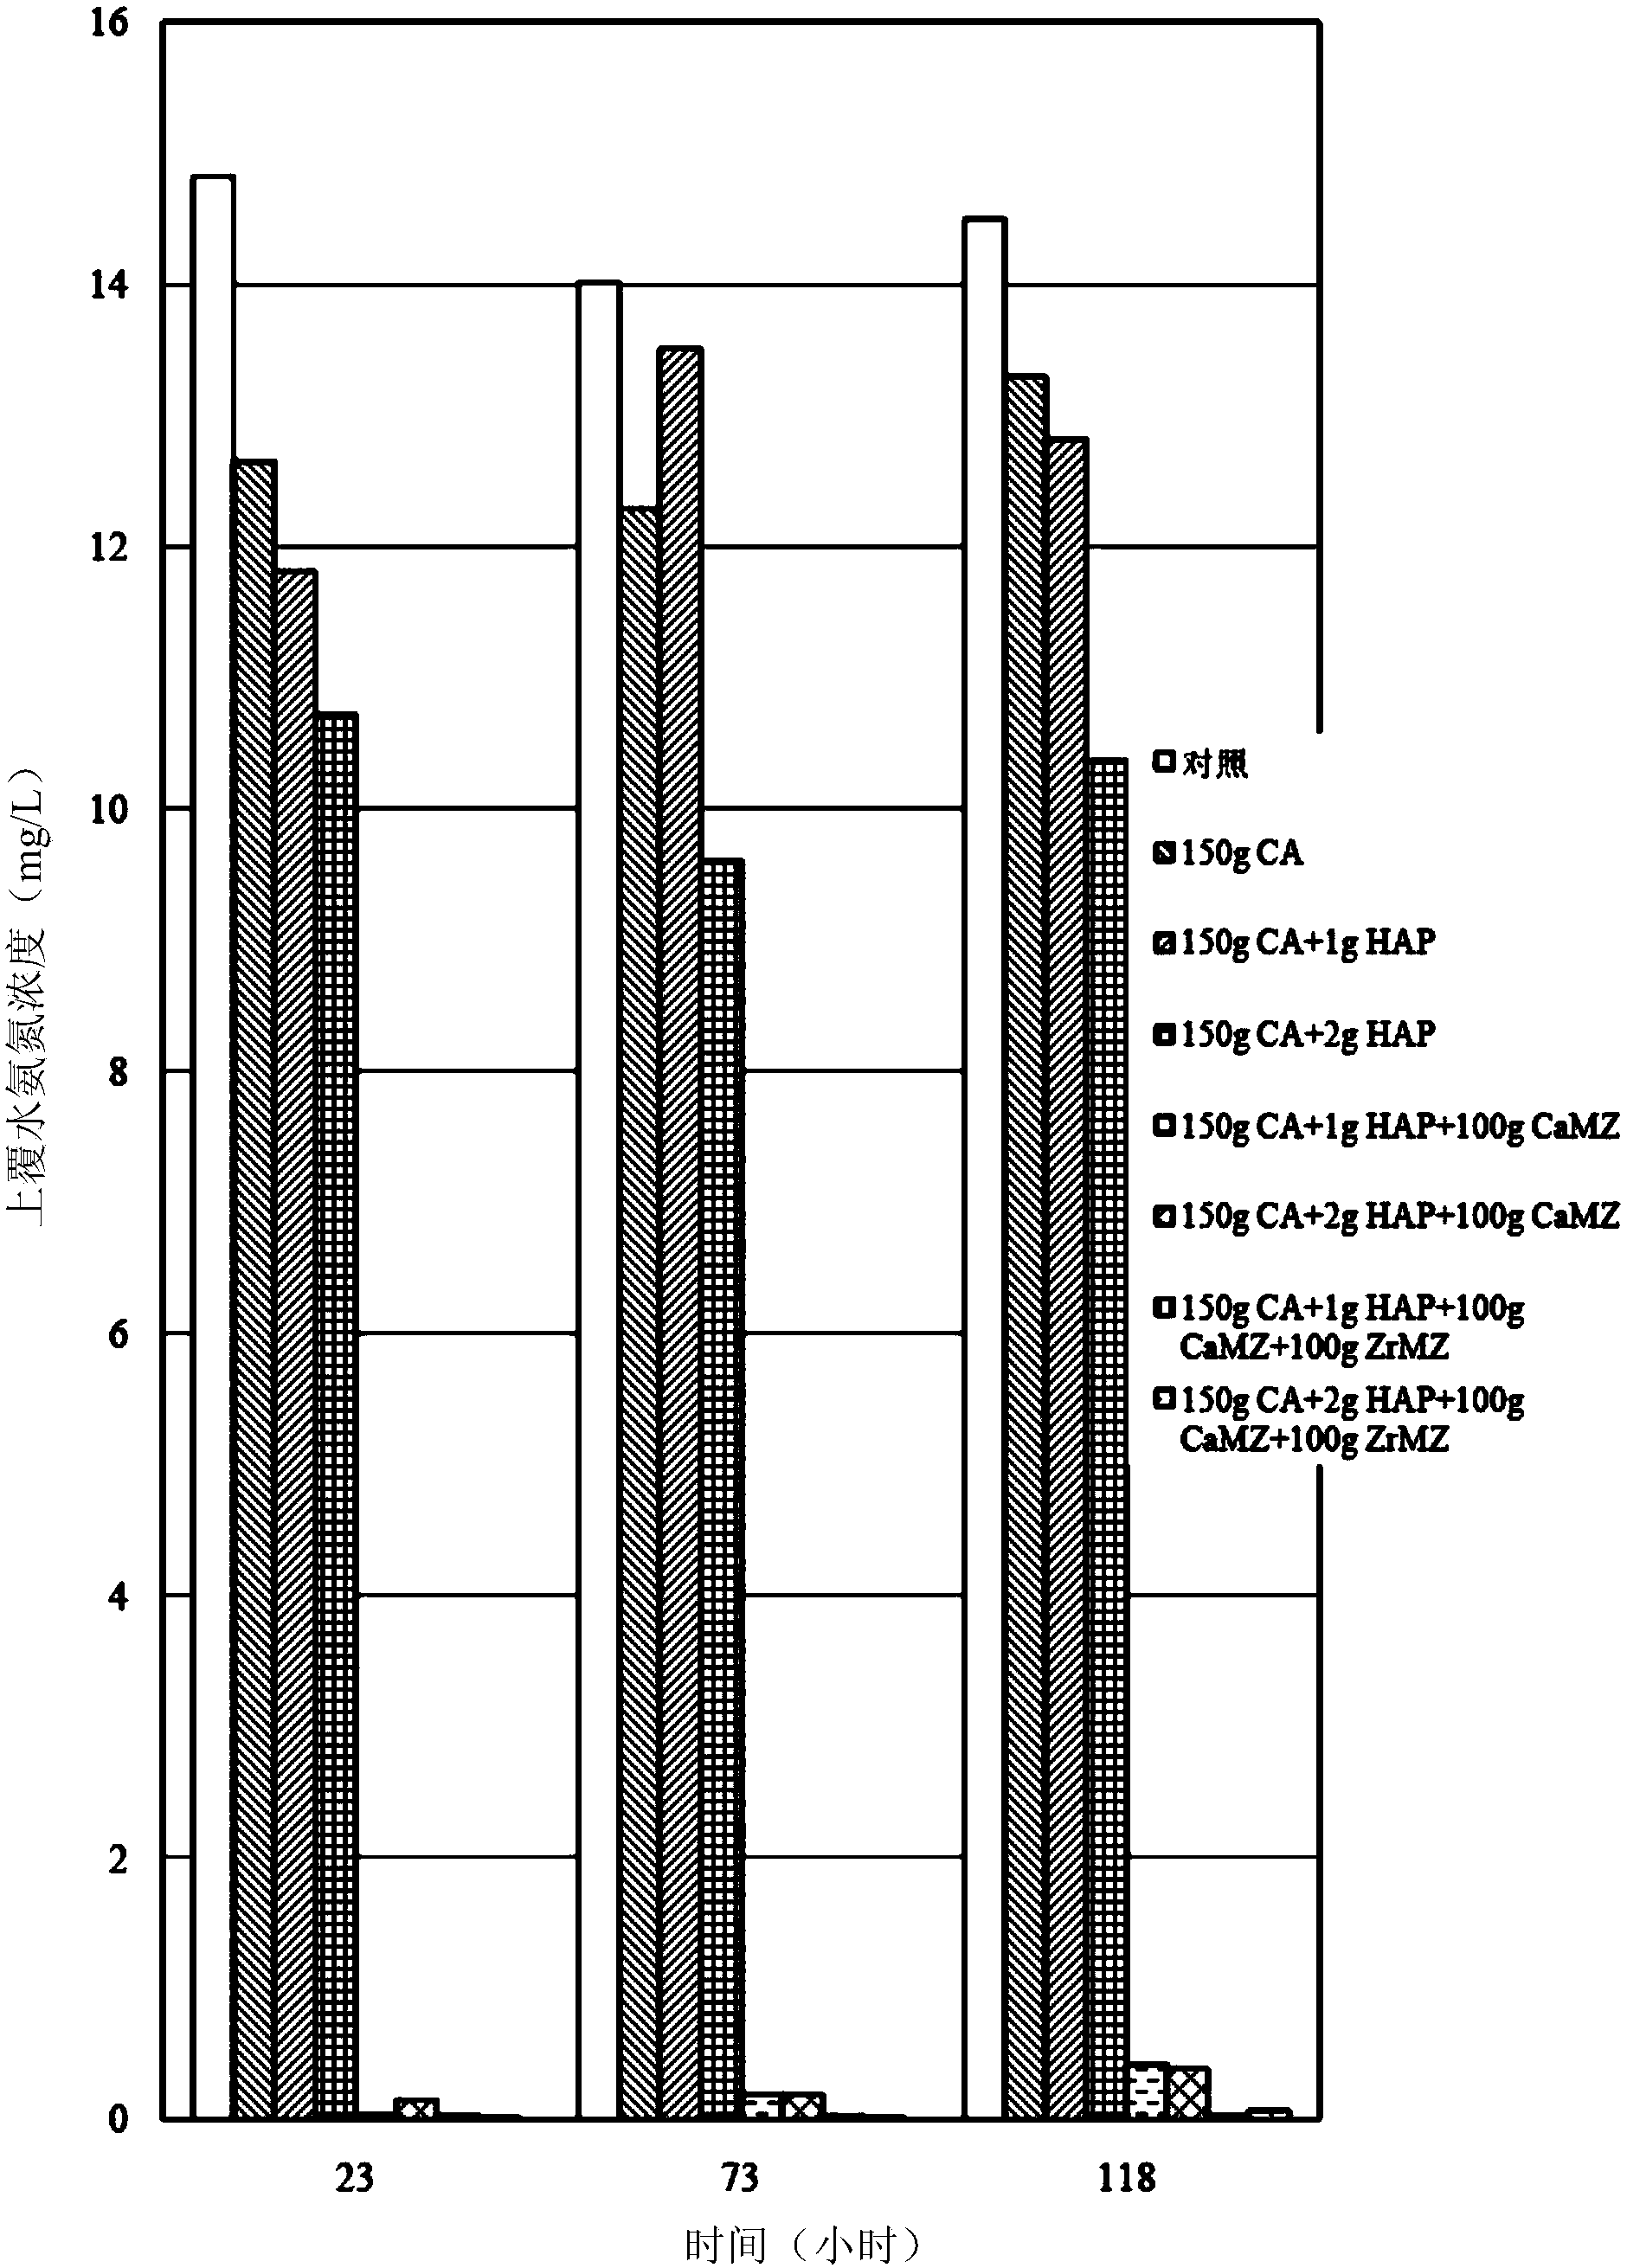 Active coverage system for in-situ control of surface water bottom sediment nitrogen and phosphorus release and method